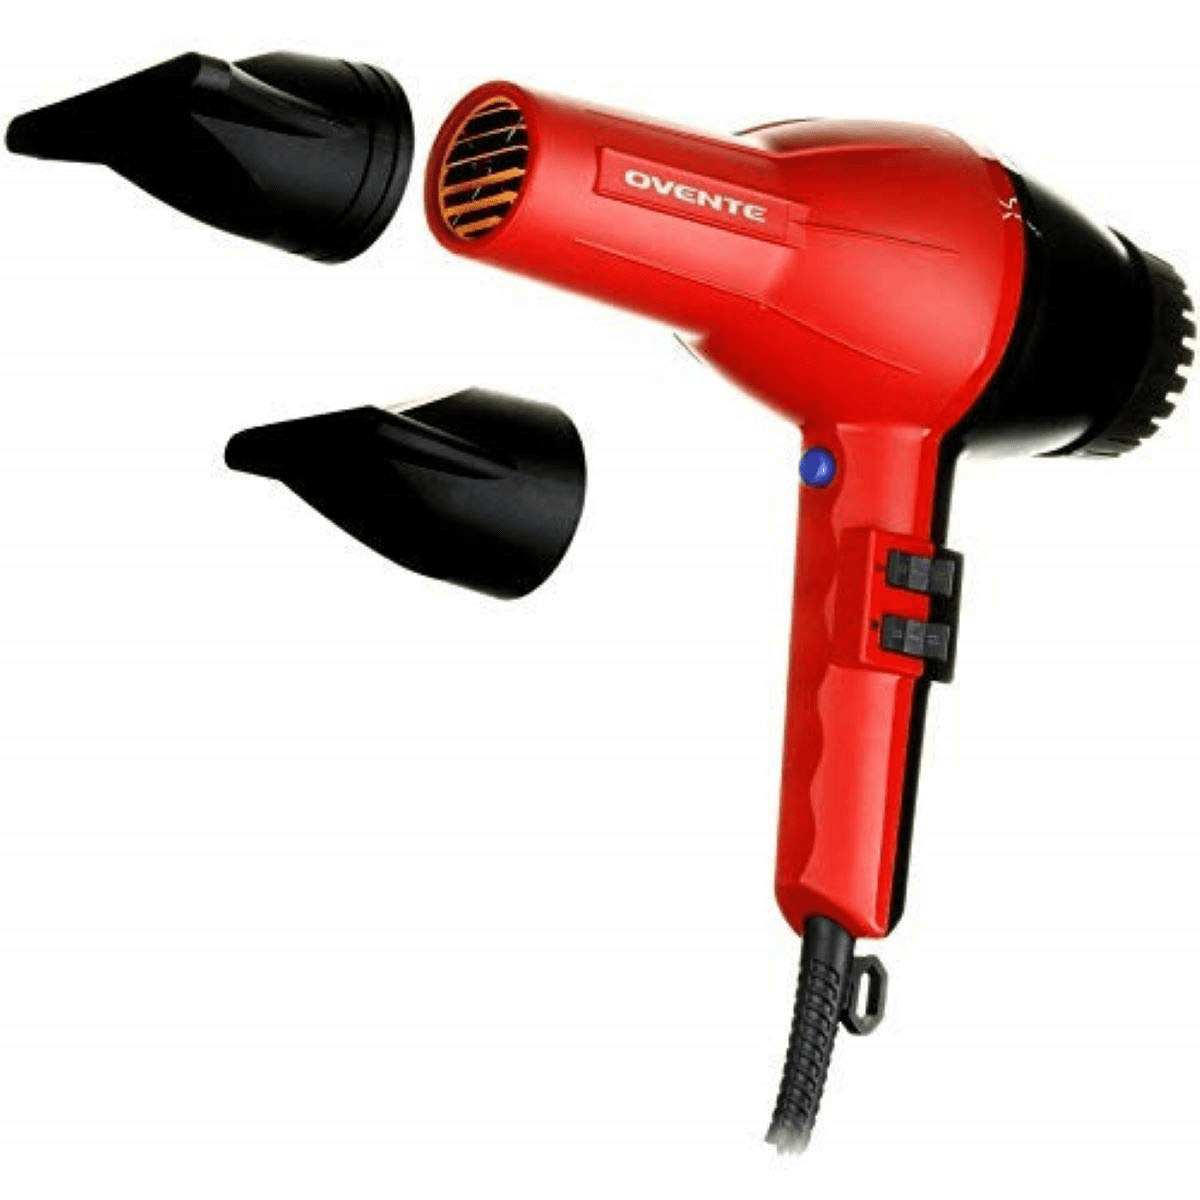 Ovente 2200 Watt Professional Hair Dryer, Ionic & Tourmaline Technology,  Ideal for Body, Volume & Smoothing, Comes w/ 2 Concentrator Nozzle  Attachments, Lightweight for Home & Travel, Black & Red 3600